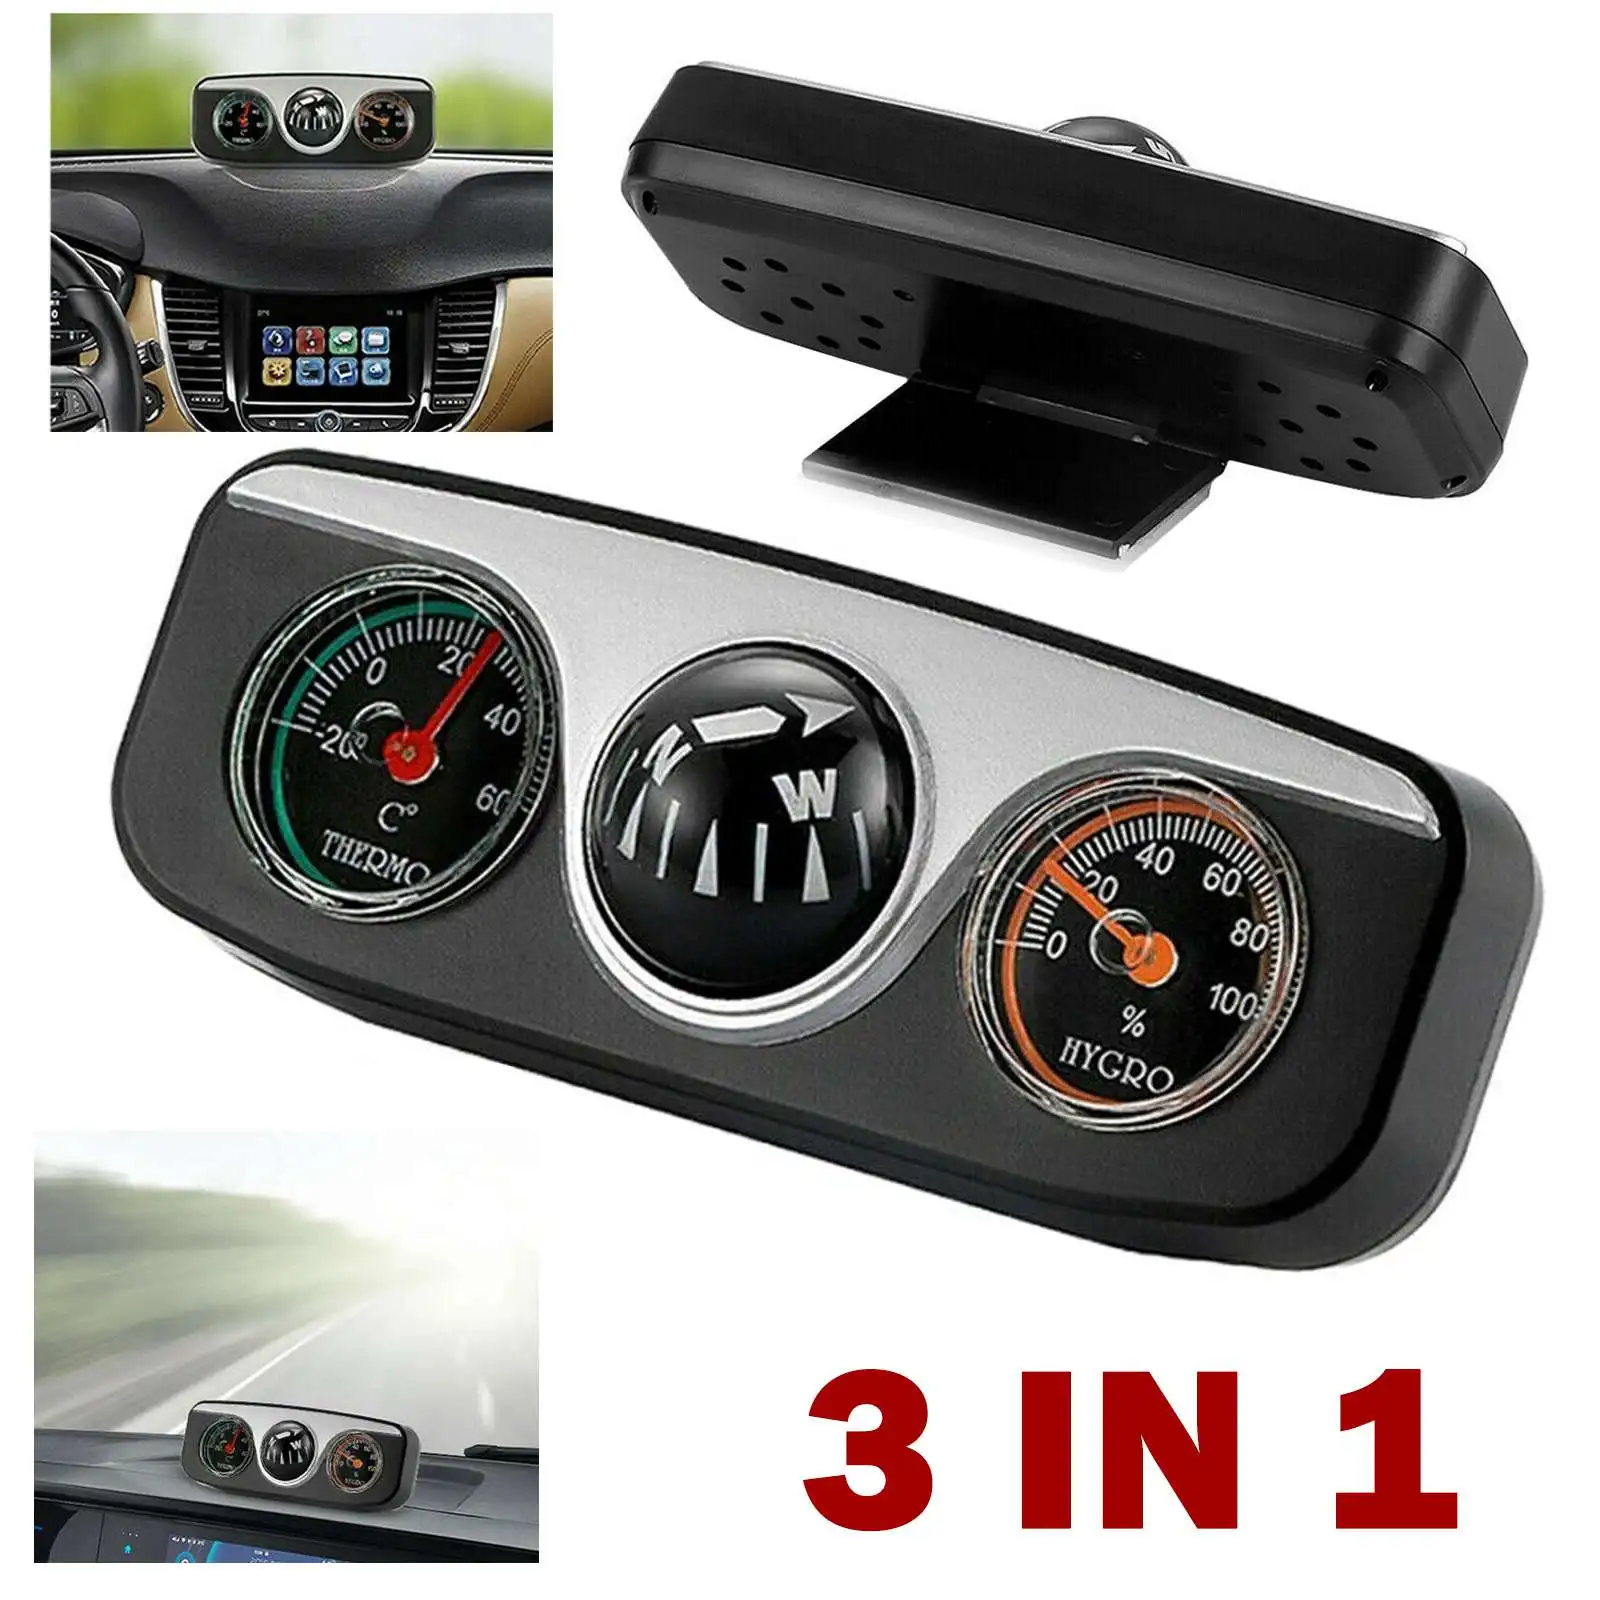 Truck Car Compass Universal Digital Mini 3 in 1 Car Truck Dash Mount Navigation Direction Compass Car Thermometer Car Hygrometer with Self-adhesive Tapes for Marine Boats Car Truck Vehicles 